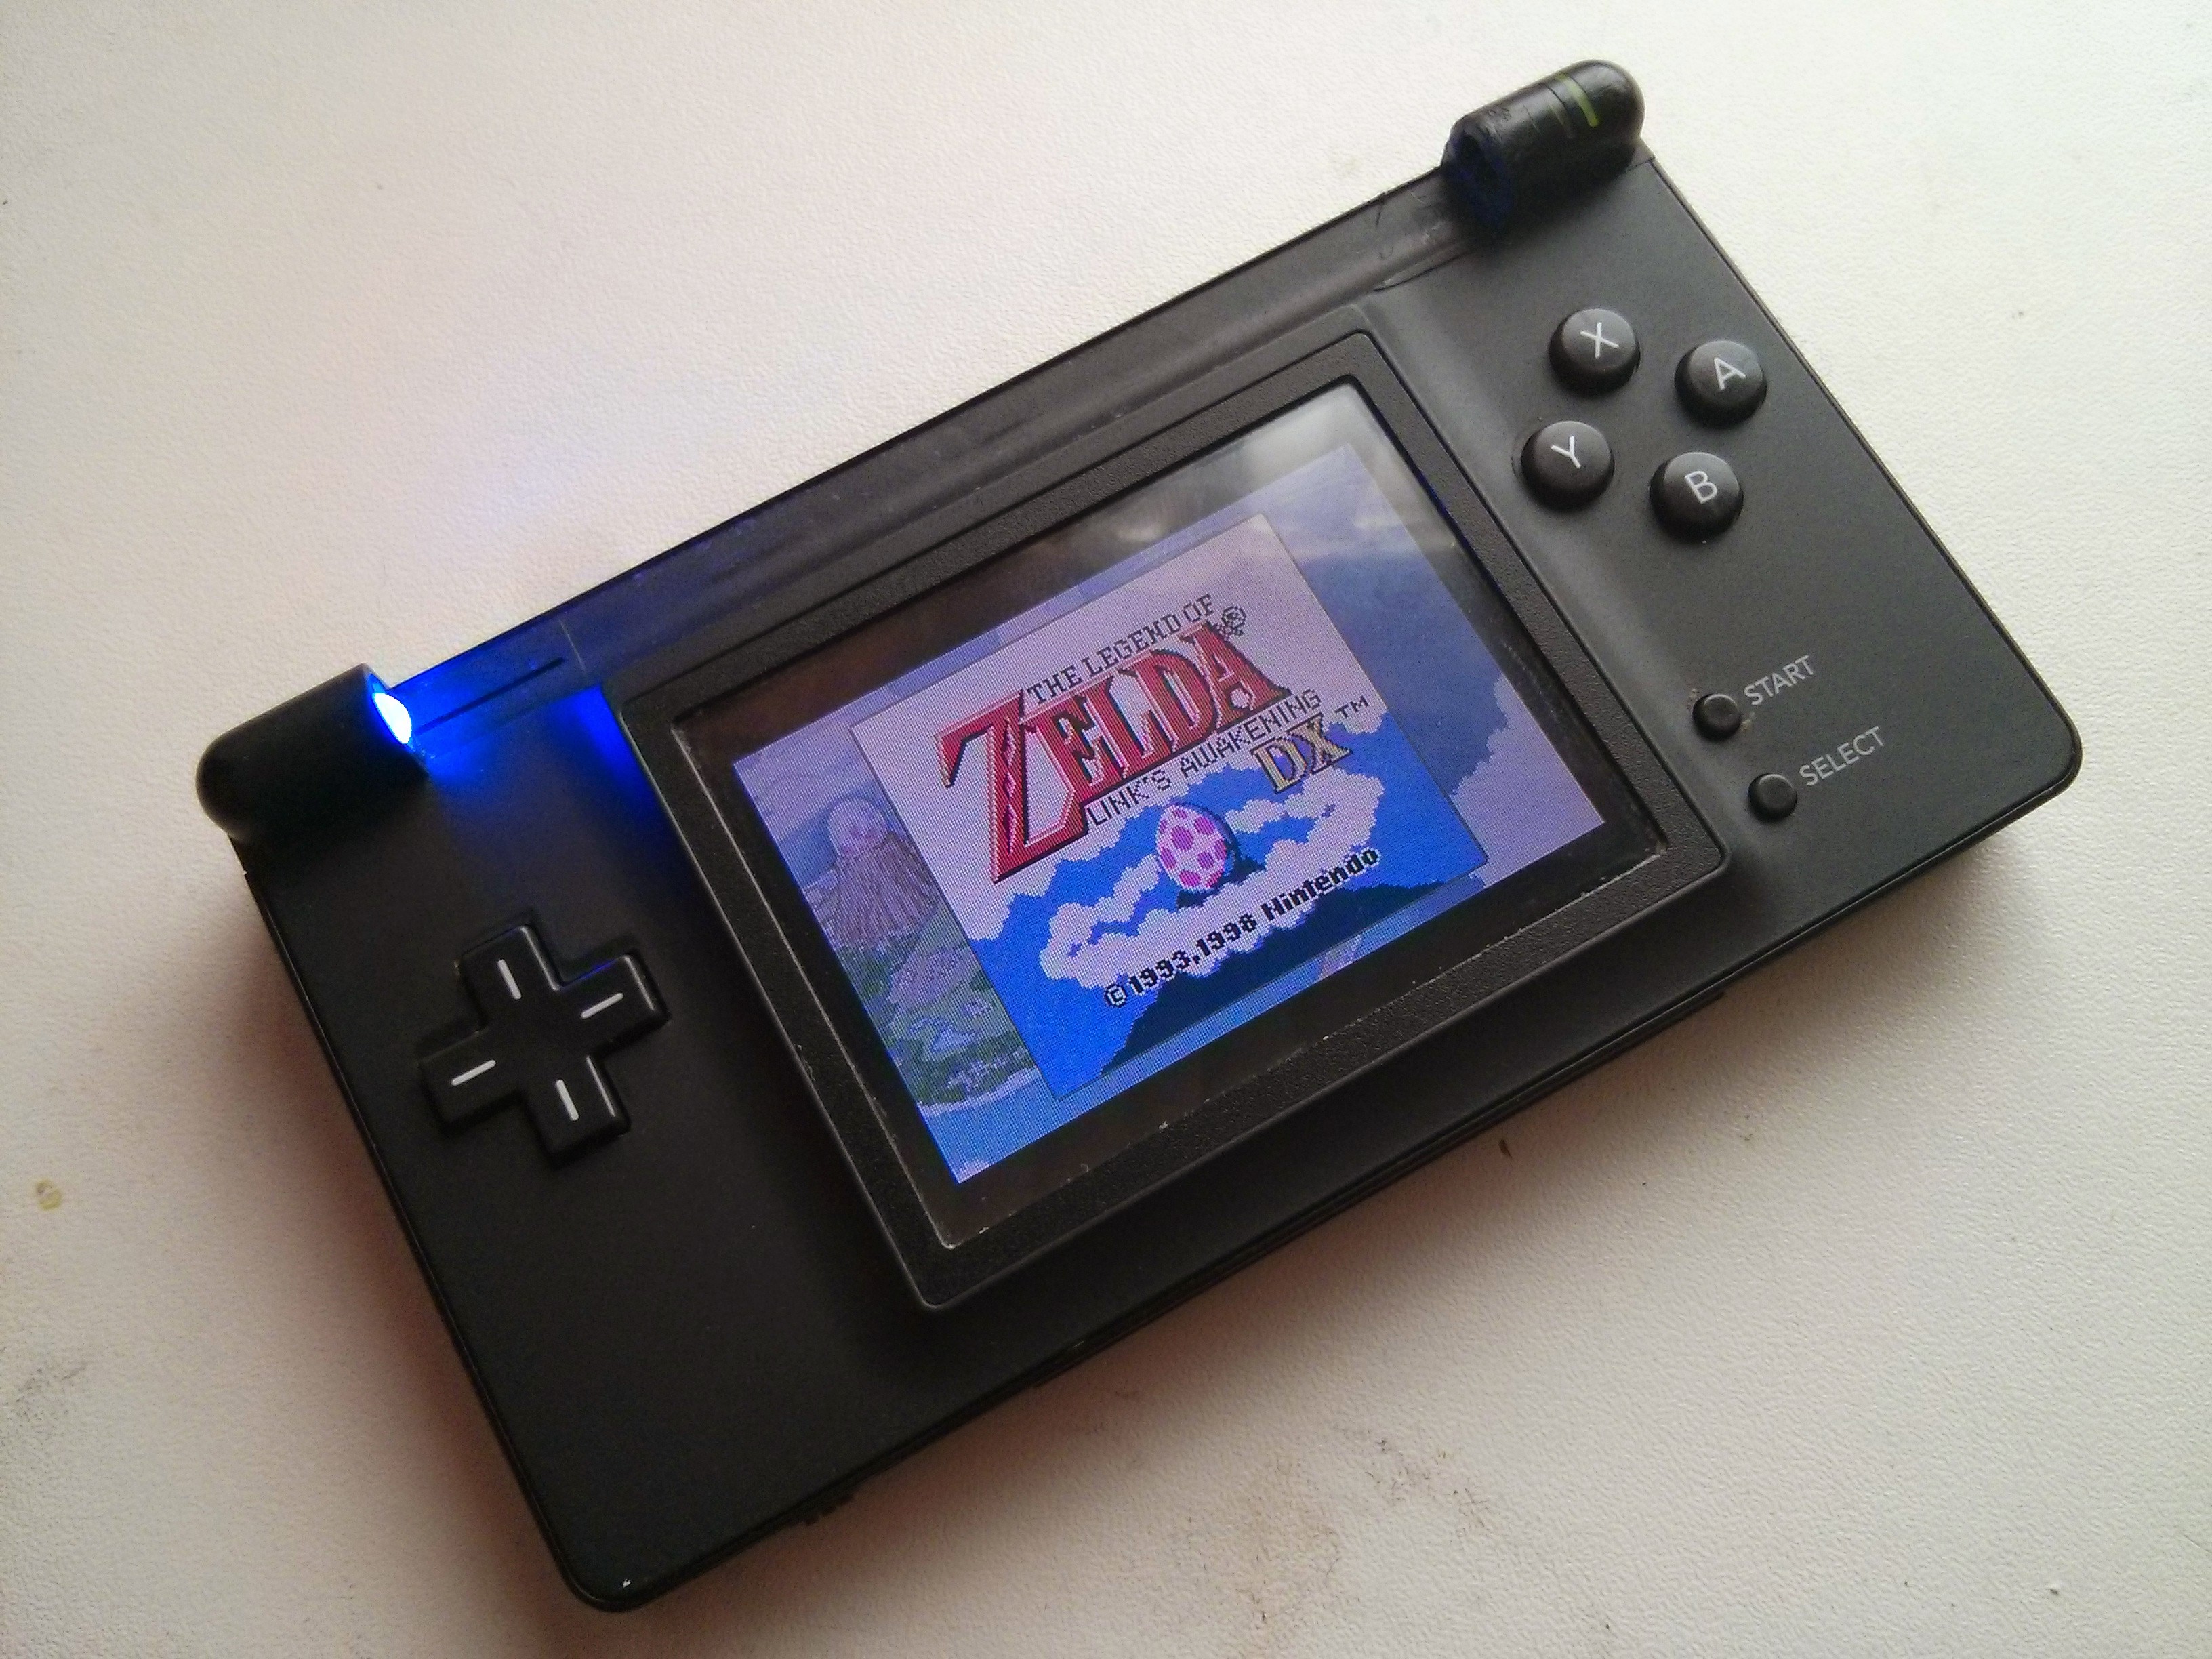 gba games on r4